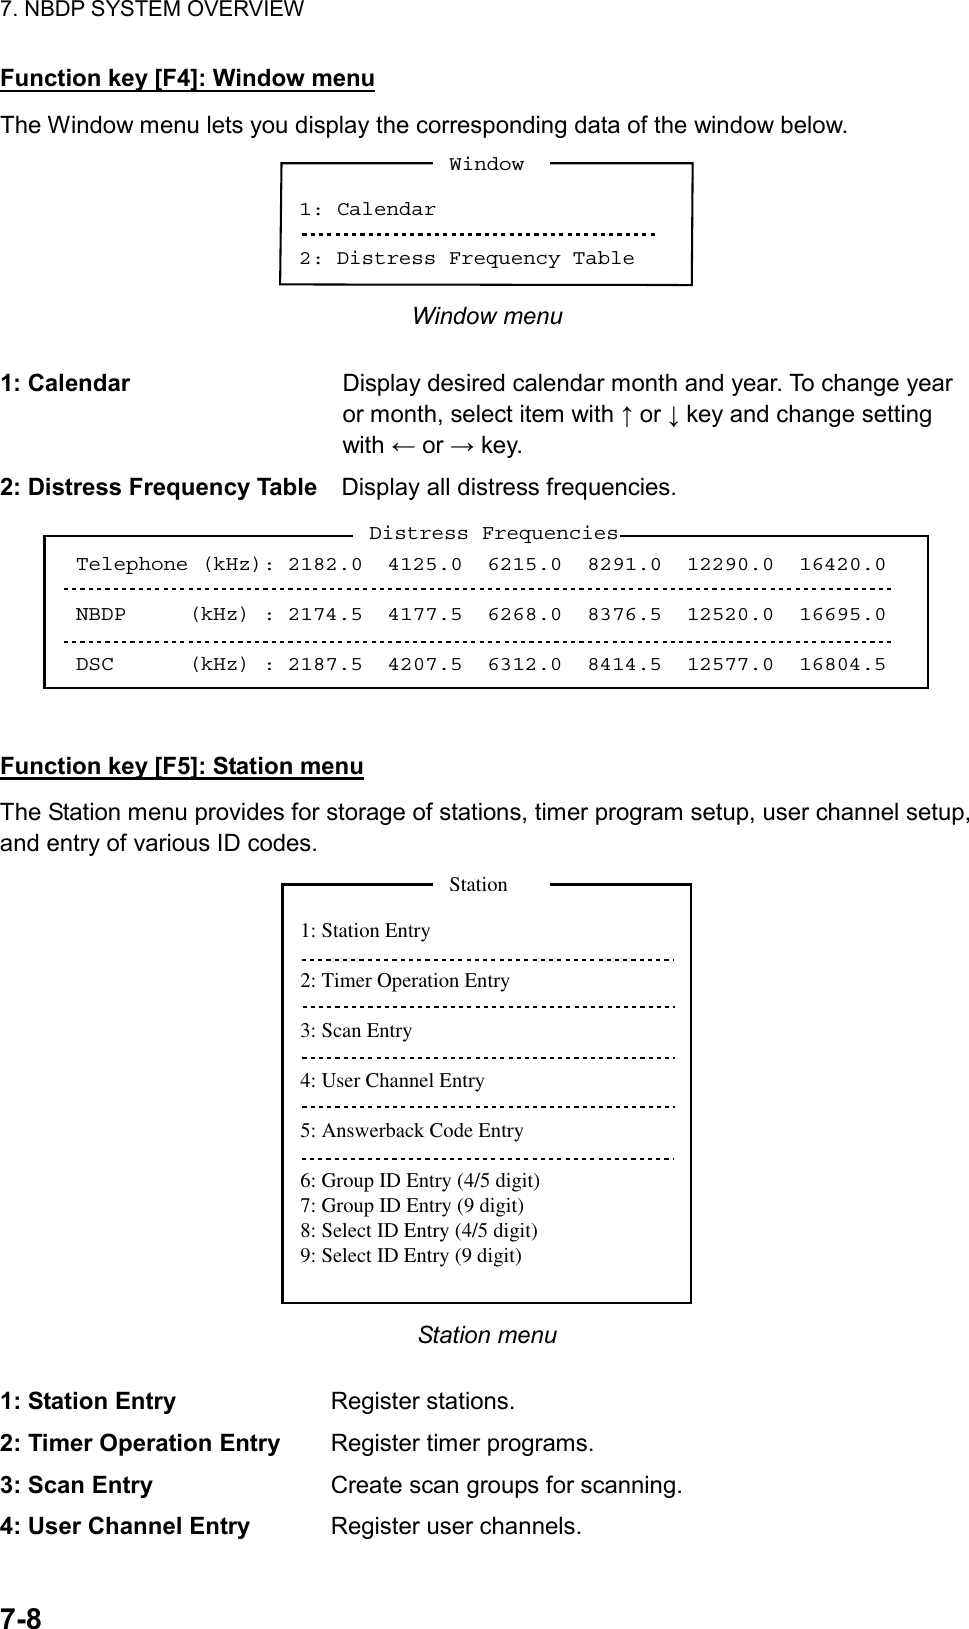 7. NBDP SYSTEM OVERVIEW  7-8  Function key [F4]: Window menu The Window menu lets you display the corresponding data of the window below. 1: Calendar2: Distress Frequency Table Window Window menu  1: Calendar  Display desired calendar month and year. To change year or month, select item with ↑ or ↓ key and change setting with ← or → key. 2: Distress Frequency Table  Display all distress frequencies. Distress FrequenciesTelephone (kHz): 2182.0  4125.0  6215.0  8291.0  12290.0  16420.0NBDP     (kHz) : 2174.5  4177.5  6268.0  8376.5  12520.0  16695.0DSC      (kHz) : 2187.5  4207.5  6312.0  8414.5  12577.0  16804.5  Function key [F5]: Station menu The Station menu provides for storage of stations, timer program setup, user channel setup, and entry of various ID codes. 1: Station Entry2: Timer Operation Entry3: Scan Entry4: User Channel Entry5: Answerback Code Entry6: Group ID Entry (4/5 digit)7: Group ID Entry (9 digit)8: Select ID Entry (4/5 digit)9: Select ID Entry (9 digit)Station Station menu  1: Station Entry Register stations. 2: Timer Operation Entry    Register timer programs. 3: Scan Entry  Create scan groups for scanning. 4: User Channel Entry  Register user channels. 